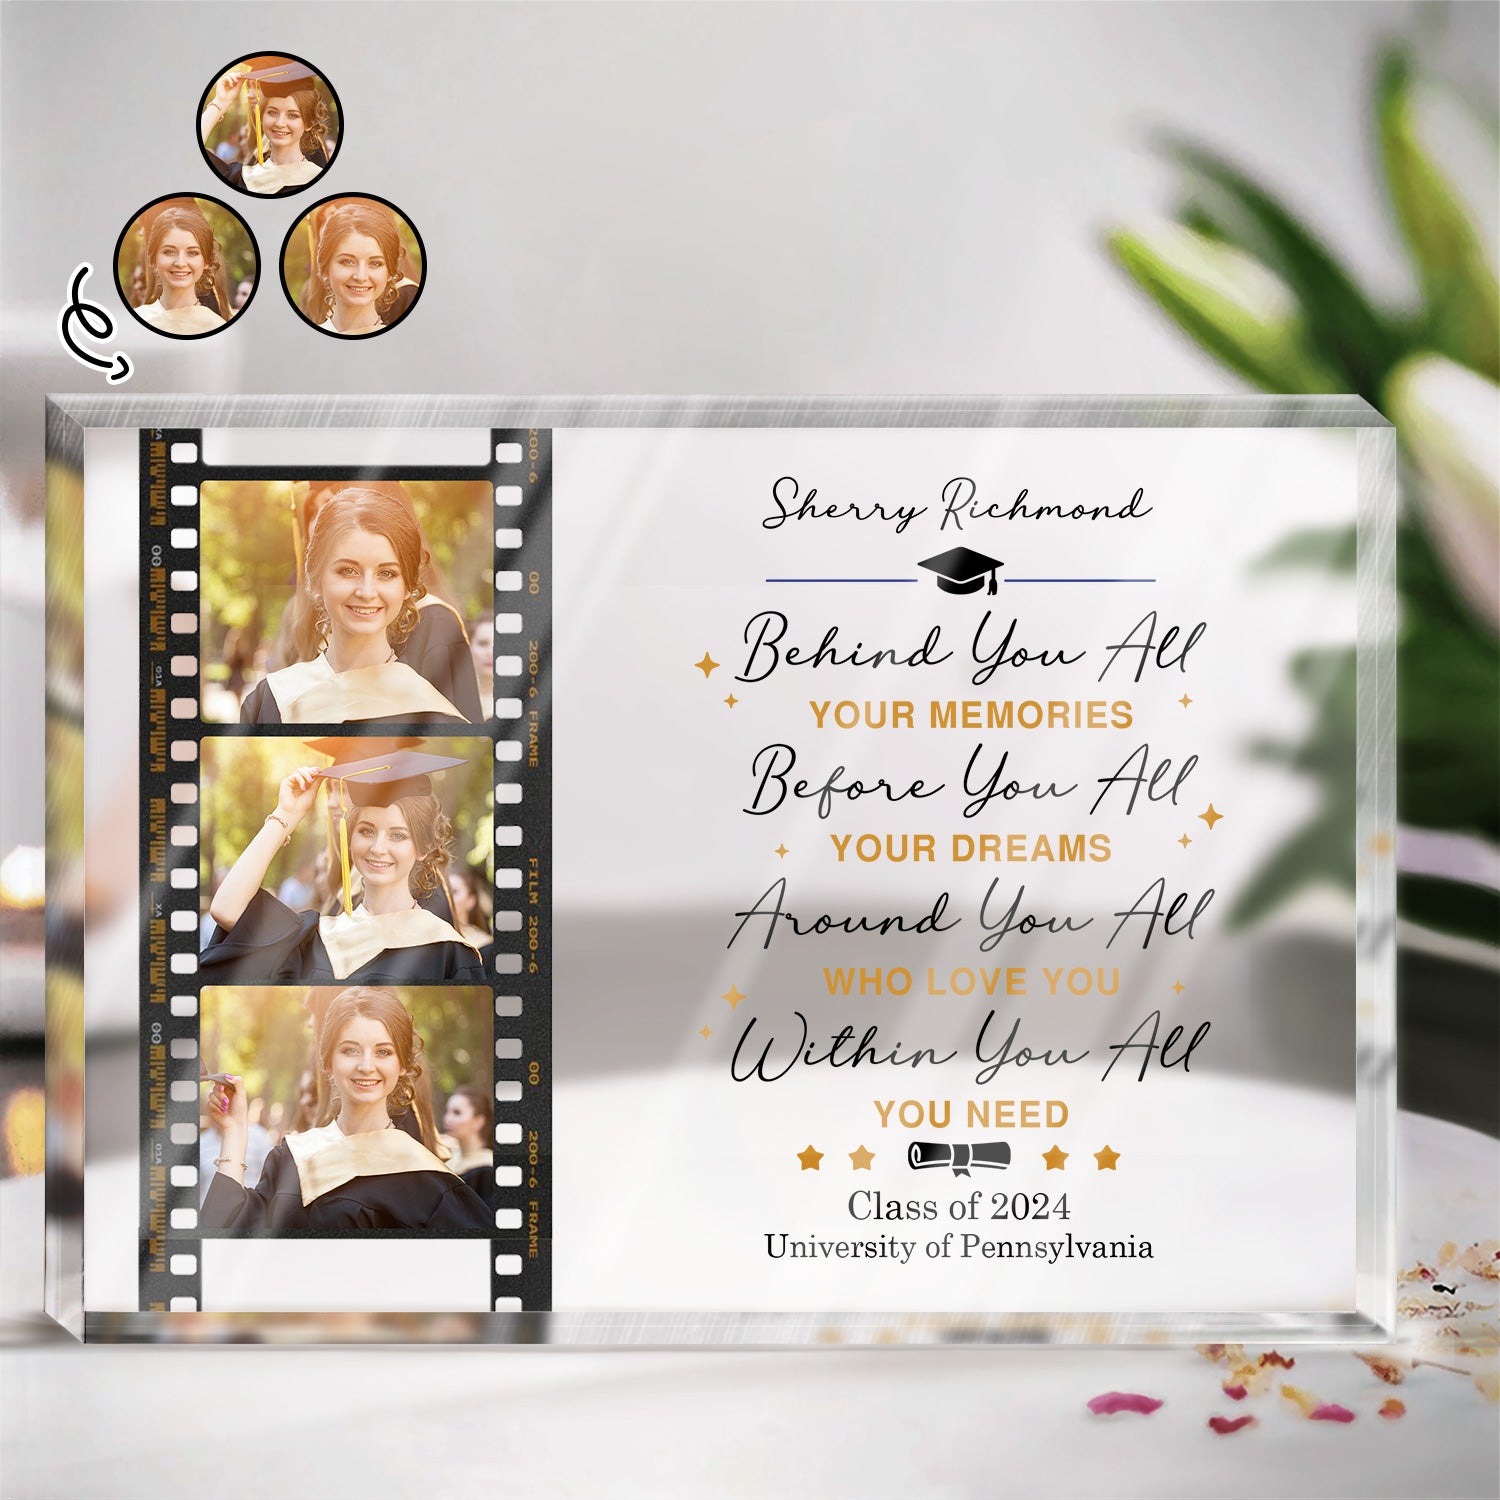 Custom Photo Behind You All Your Memories - Graduation Gift For Friends, Children - Personalized Rectangle Shaped Acrylic Plaque